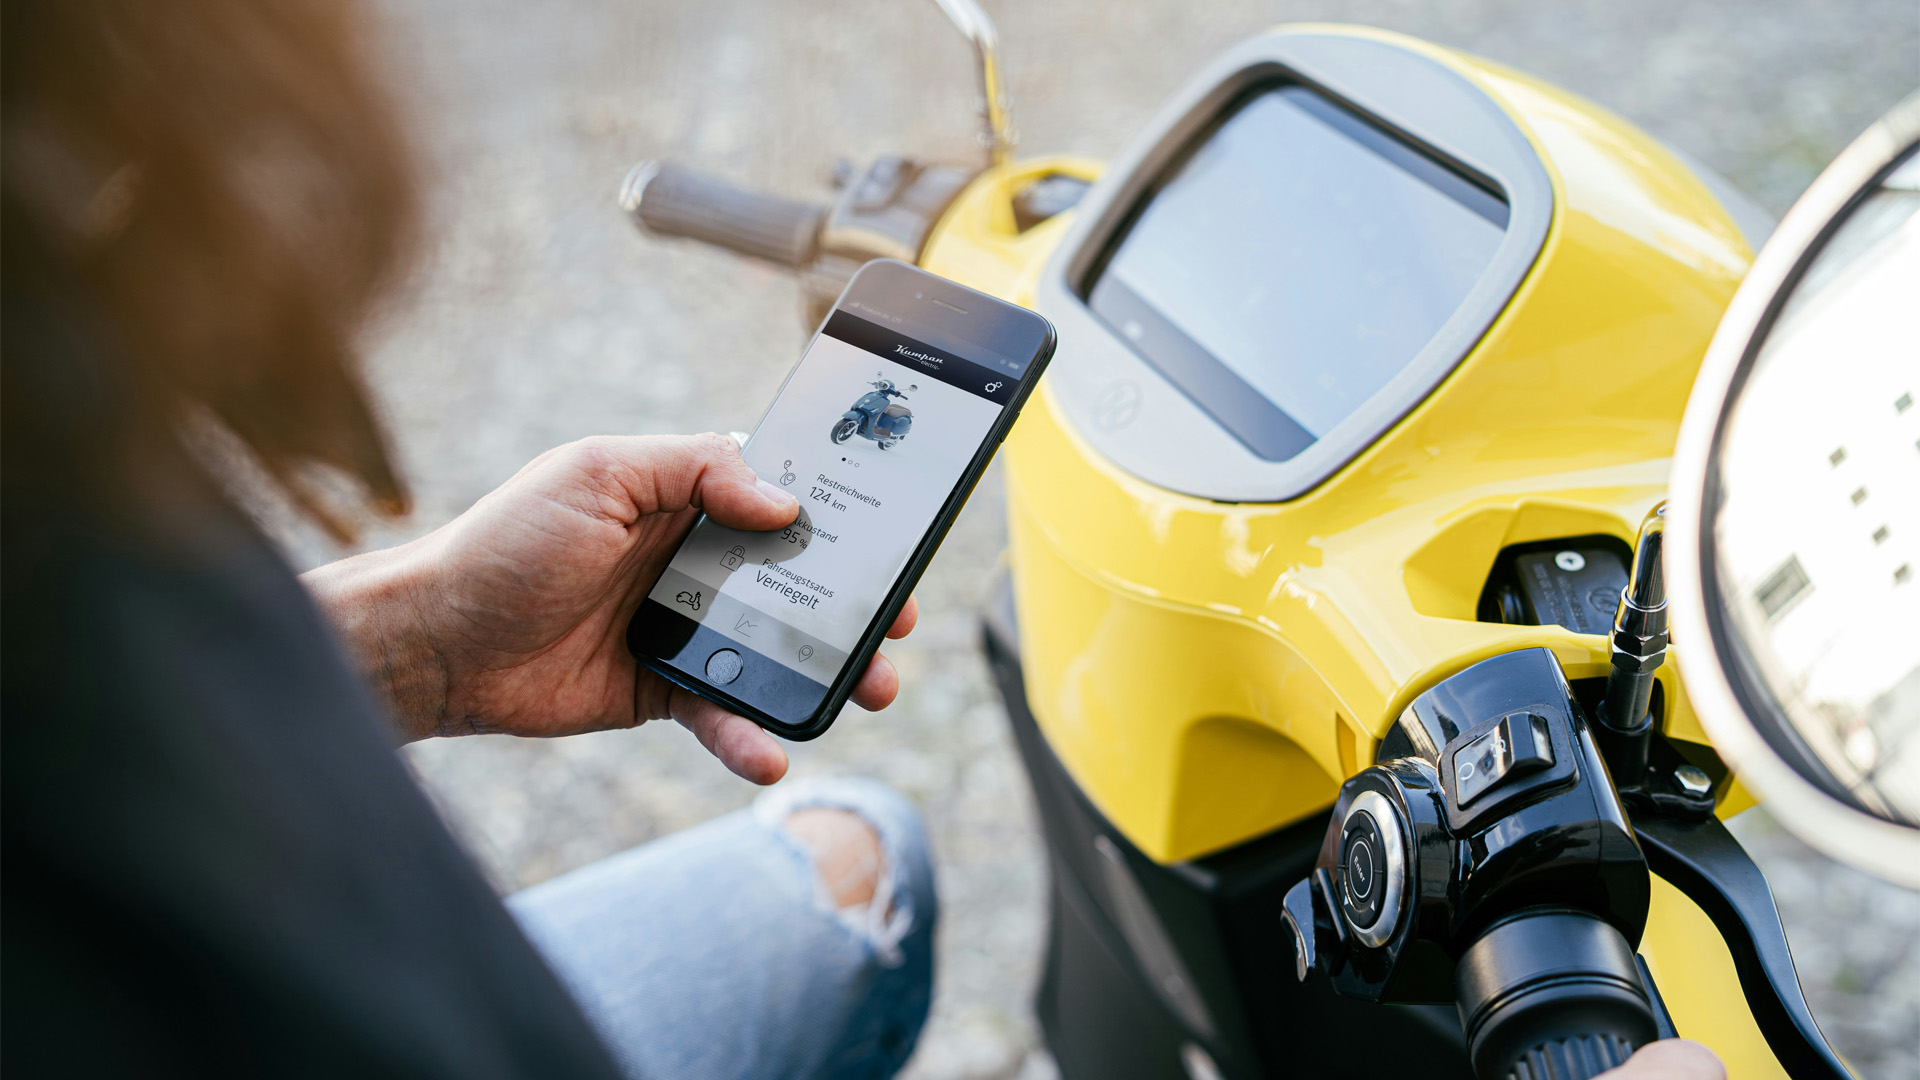 decorative: a person holding a phone that has information about the scooter they are sitting on